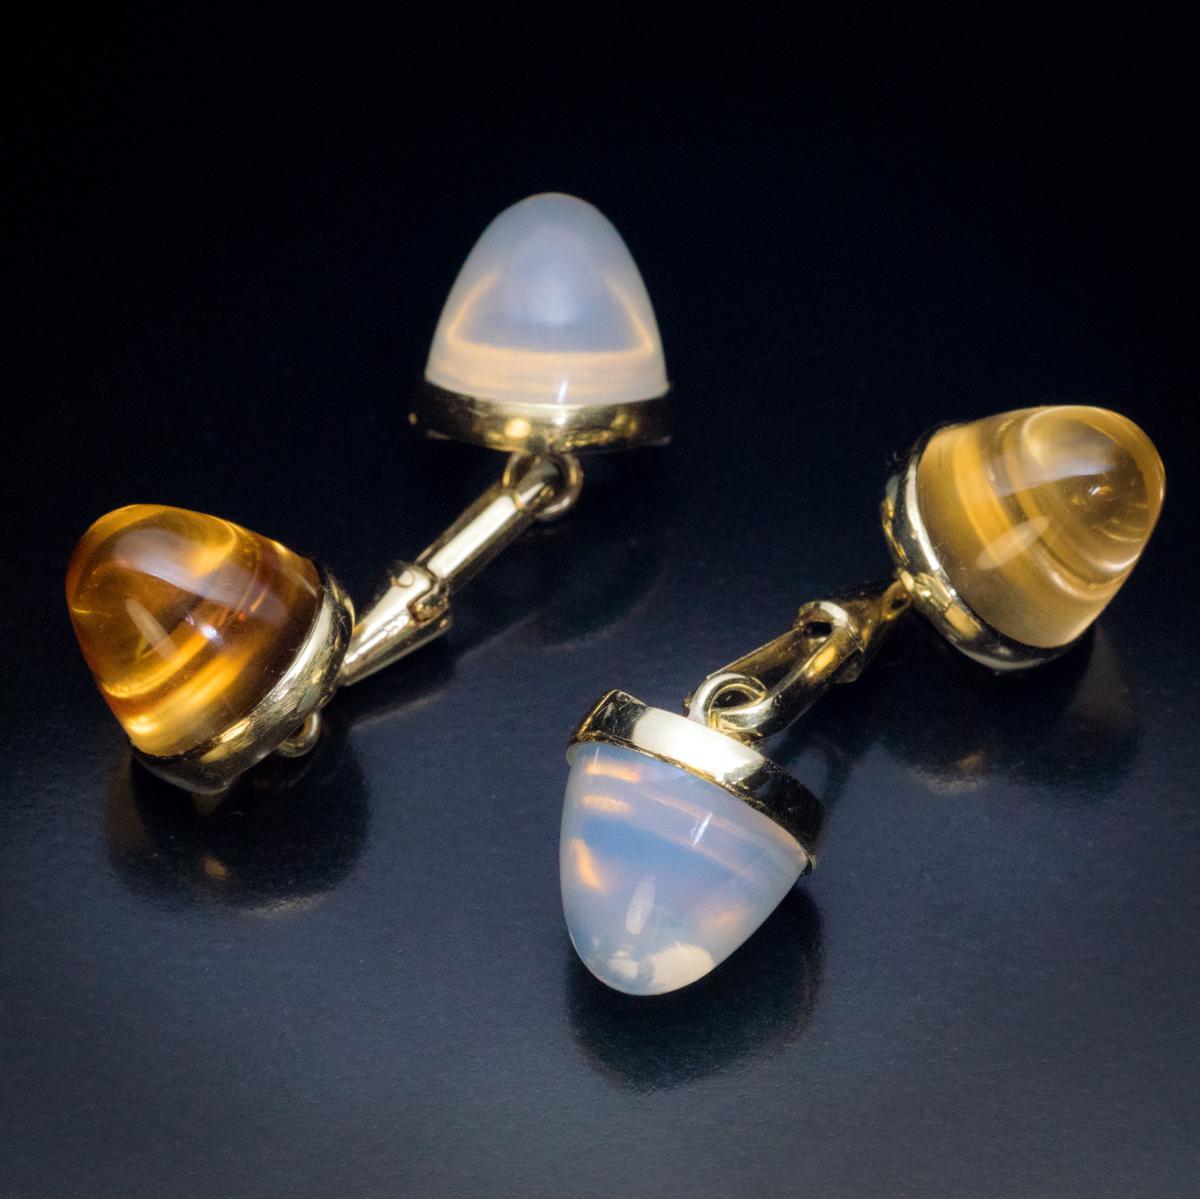 Antique Cabochon Cut Moonstone Citrine Gold Cufflinks In Excellent Condition For Sale In Chicago, IL